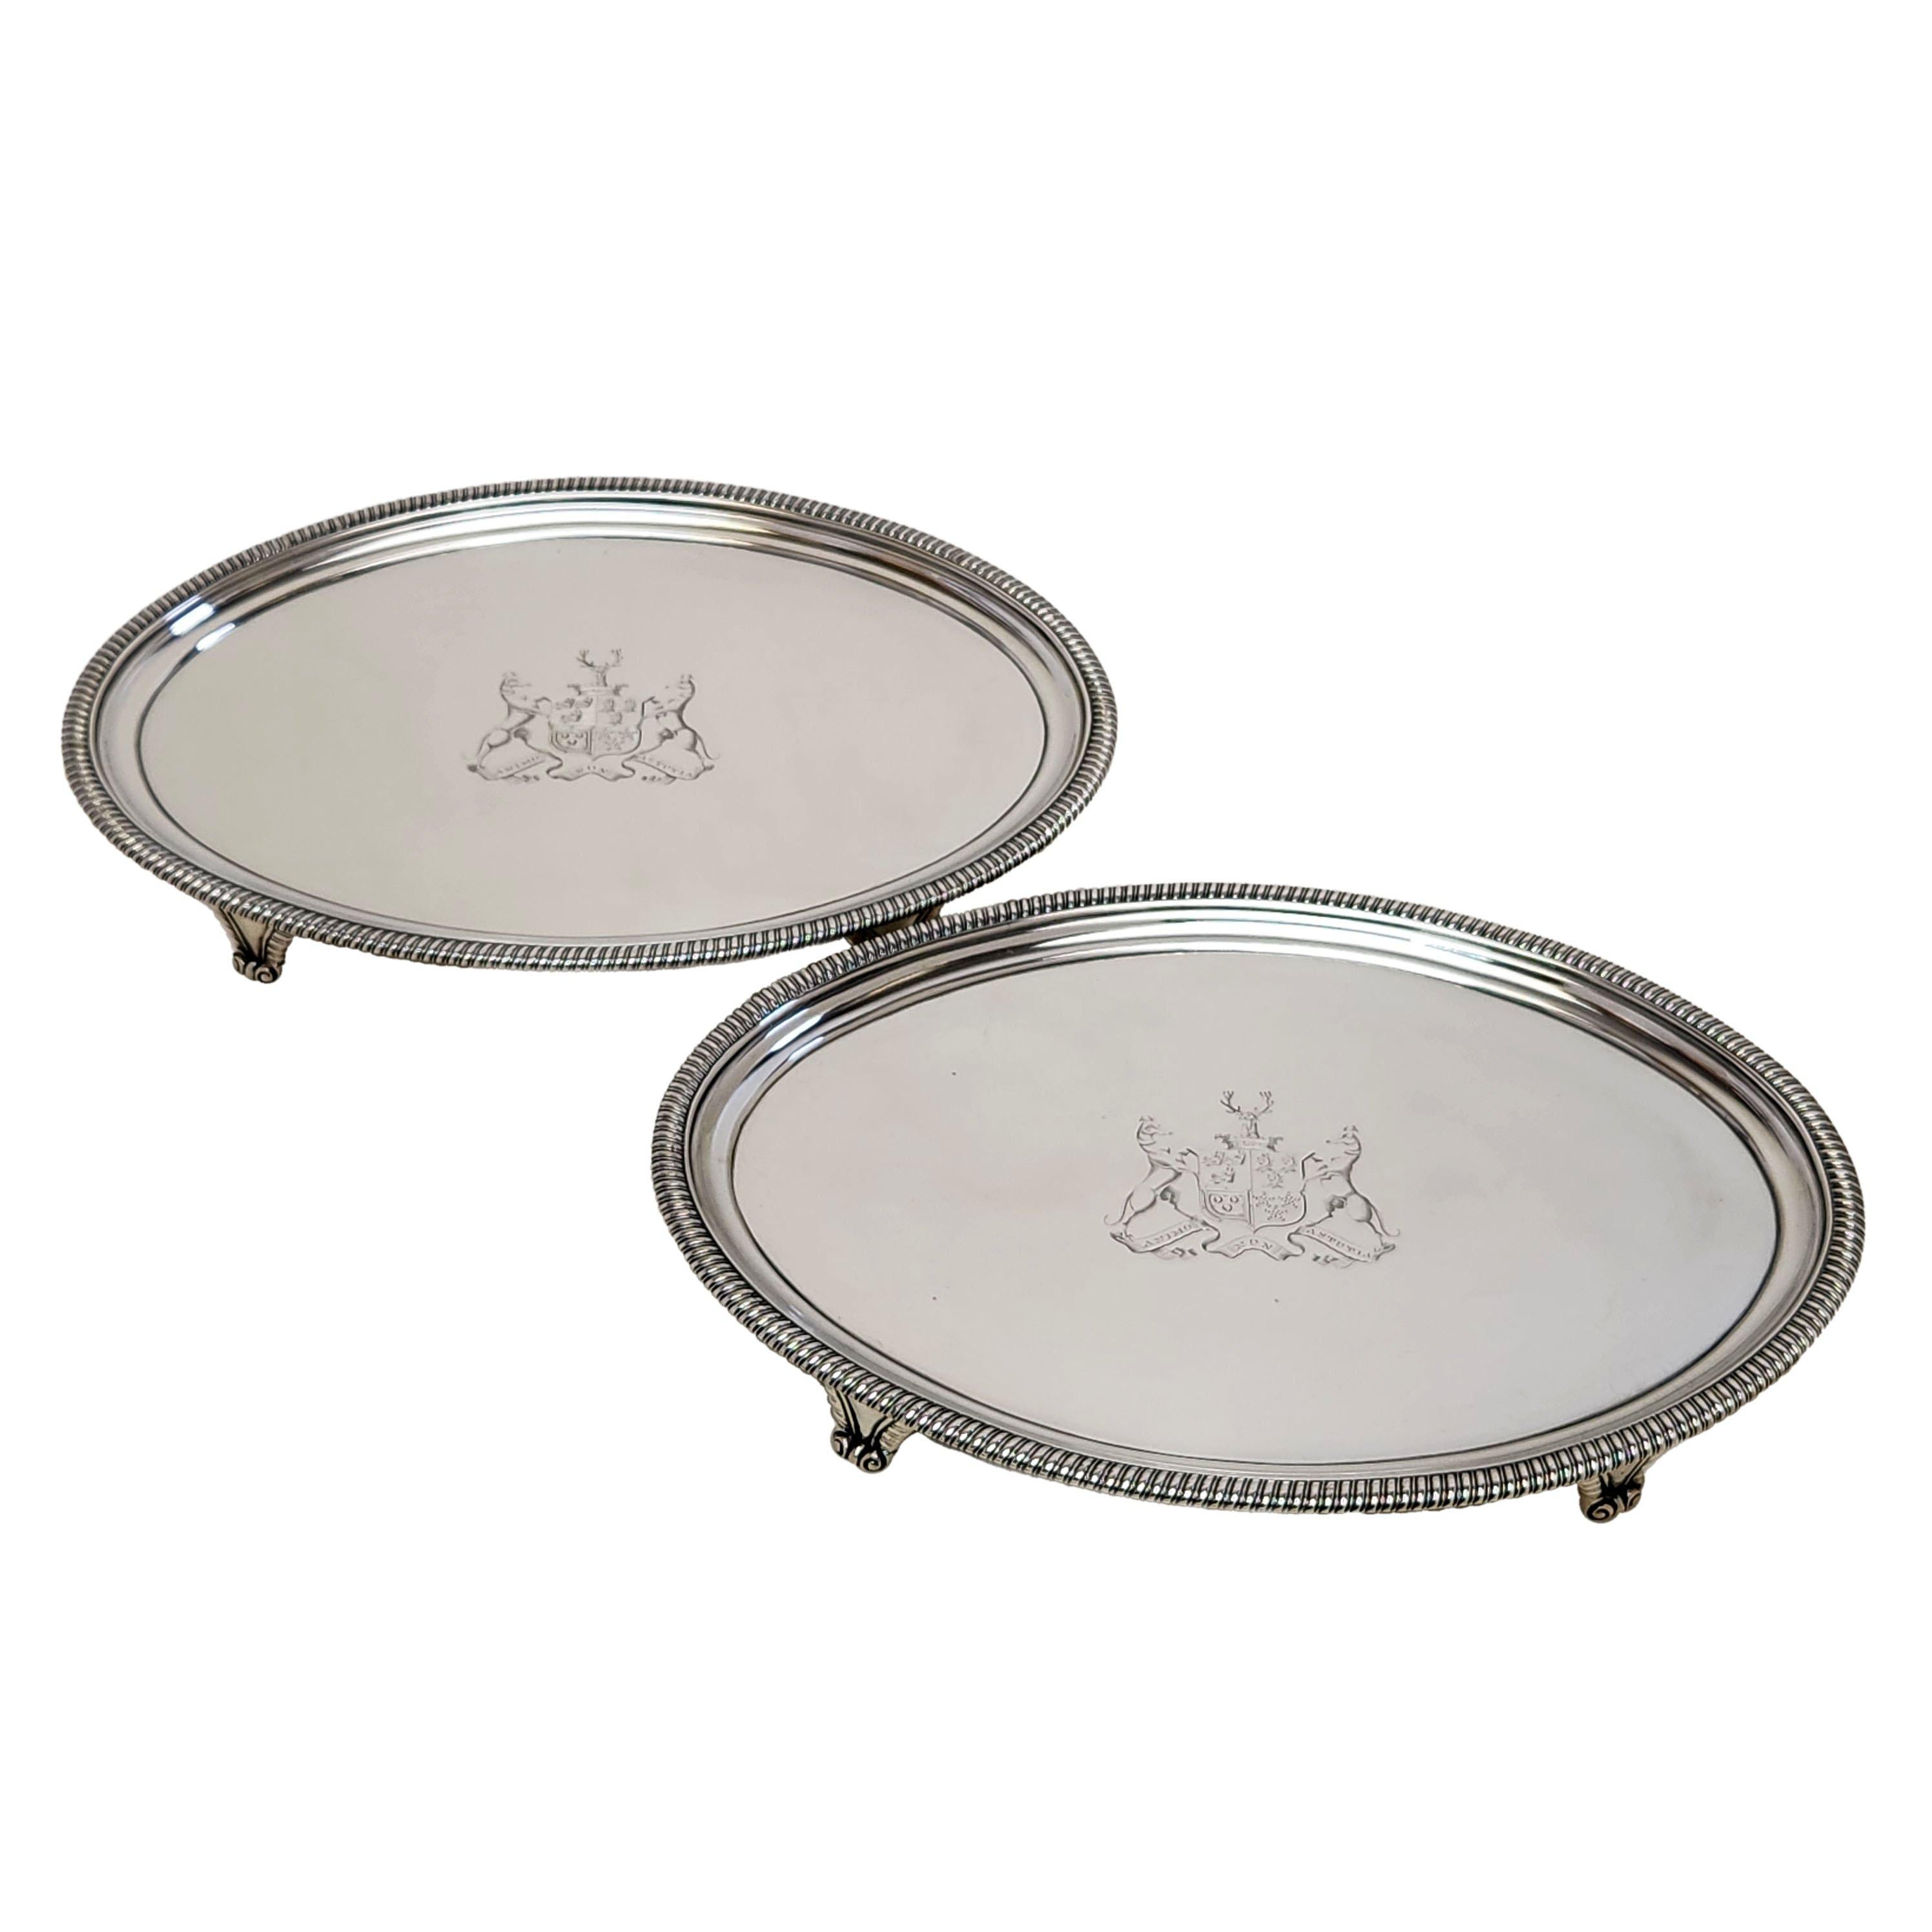 A pair of elegant George III Oval Silver Salvers with classic gadroon borders. Each Salver has an impressive armorial engraved in the centre. Each Georgian Salver Stands on four gadroon patterned feet.

Made in London, England in1806 by John